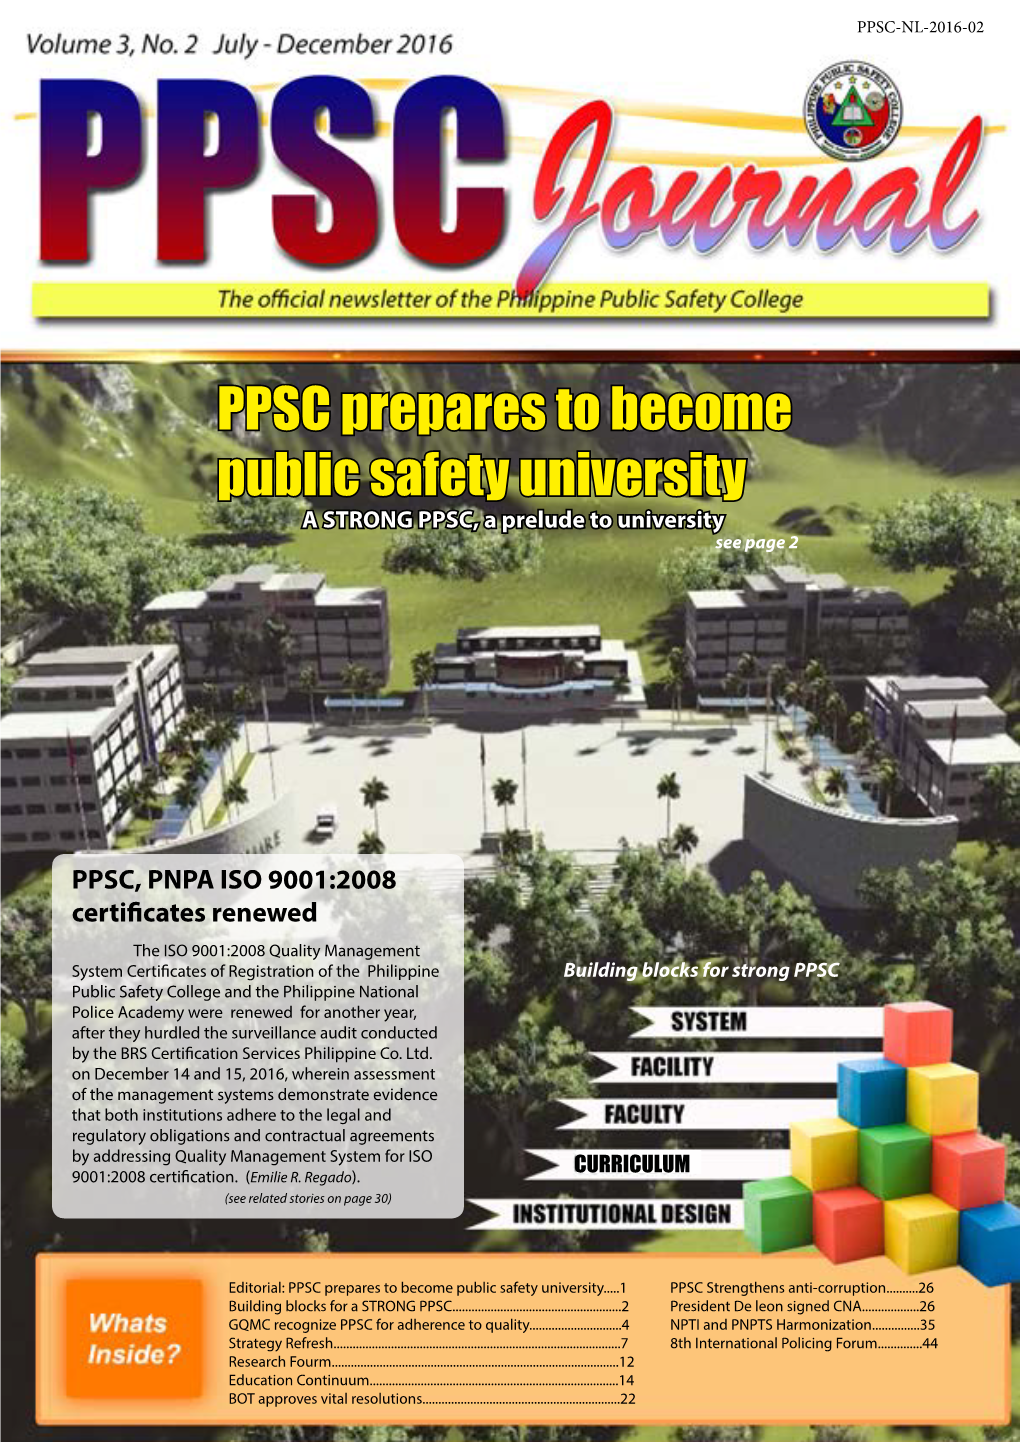 PPSC Prepares to Become Public Safety University a STRONG PPSC, a Prelude to University See Page 2